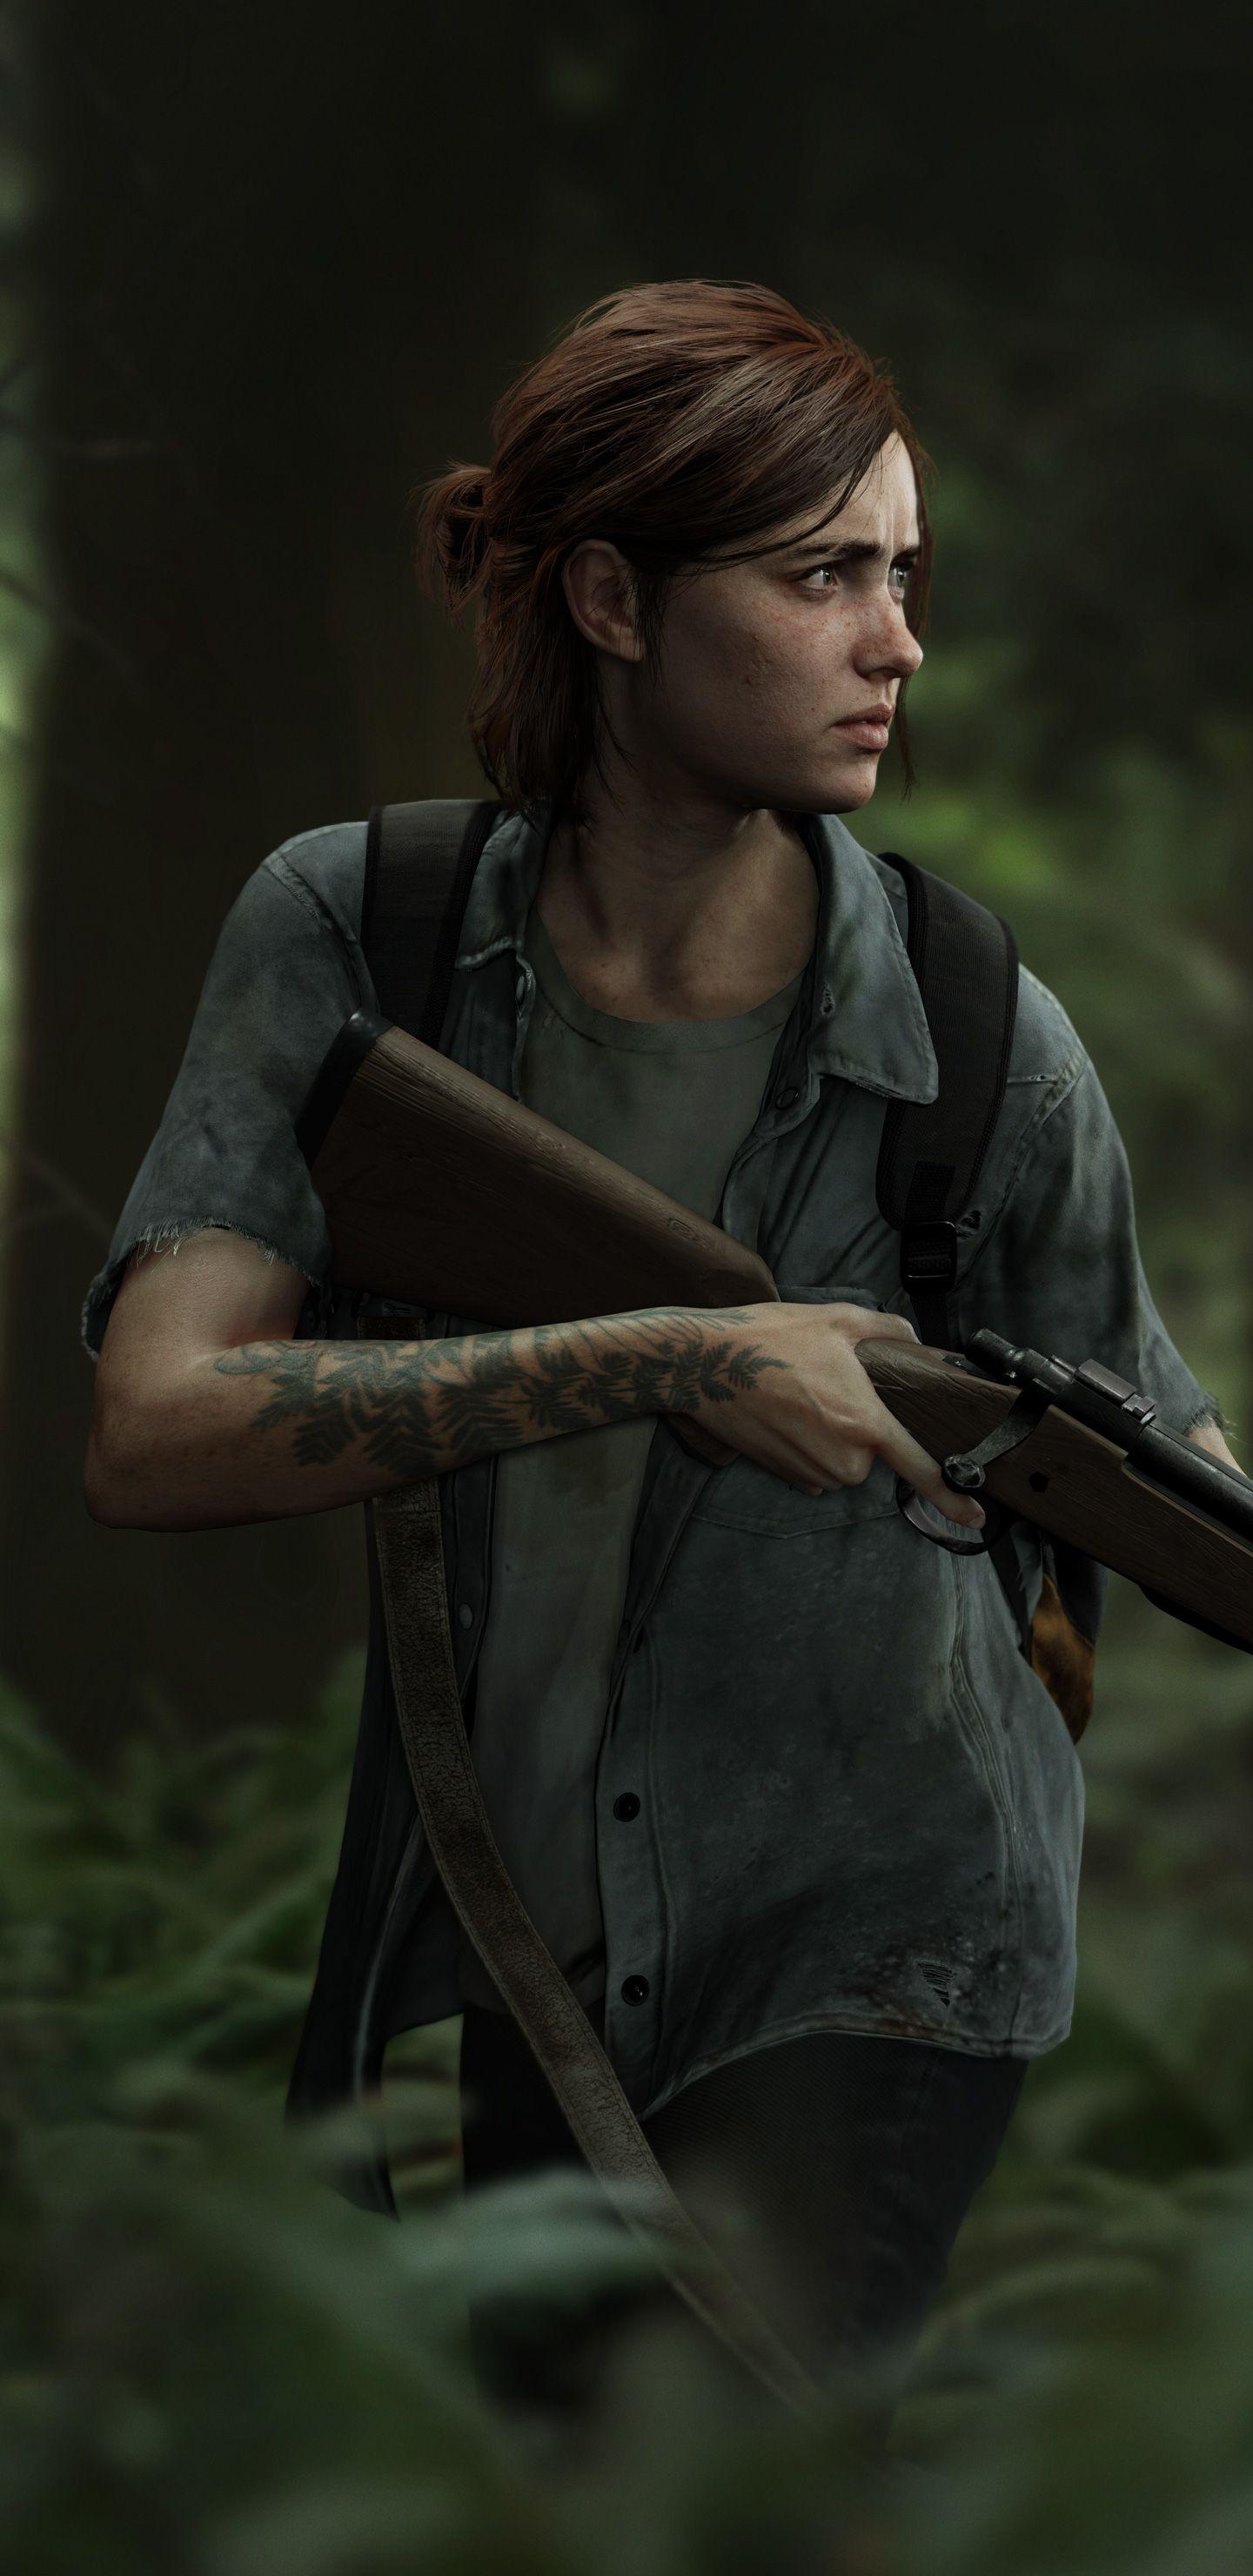 The Last of Us Part II Phone Wallpaper - Mobile Abyss